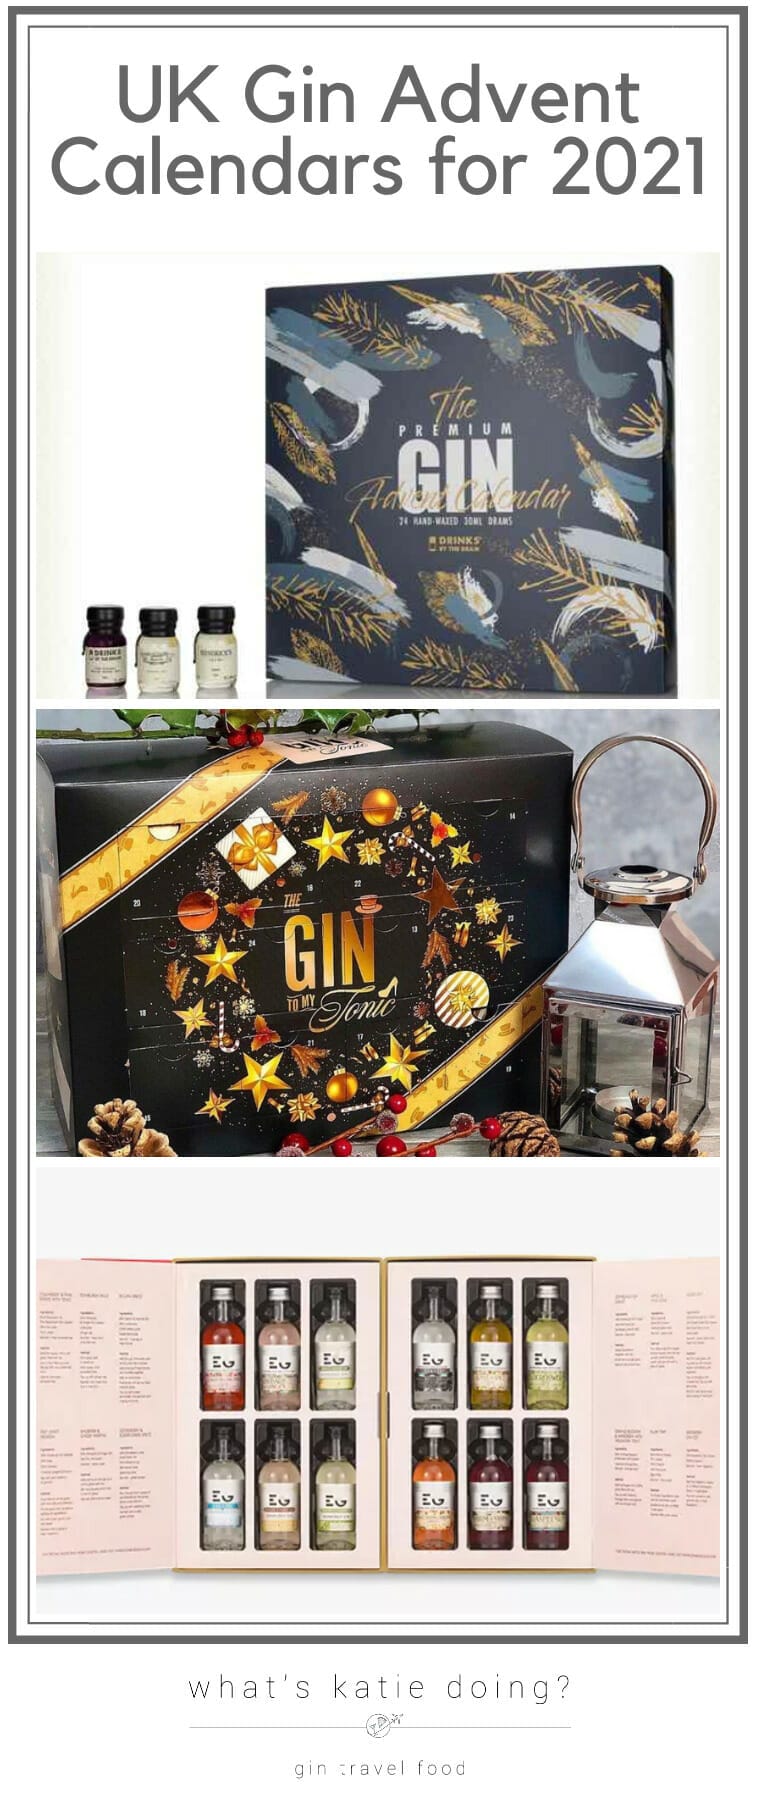 UK Gin Advent Calendars for 2021